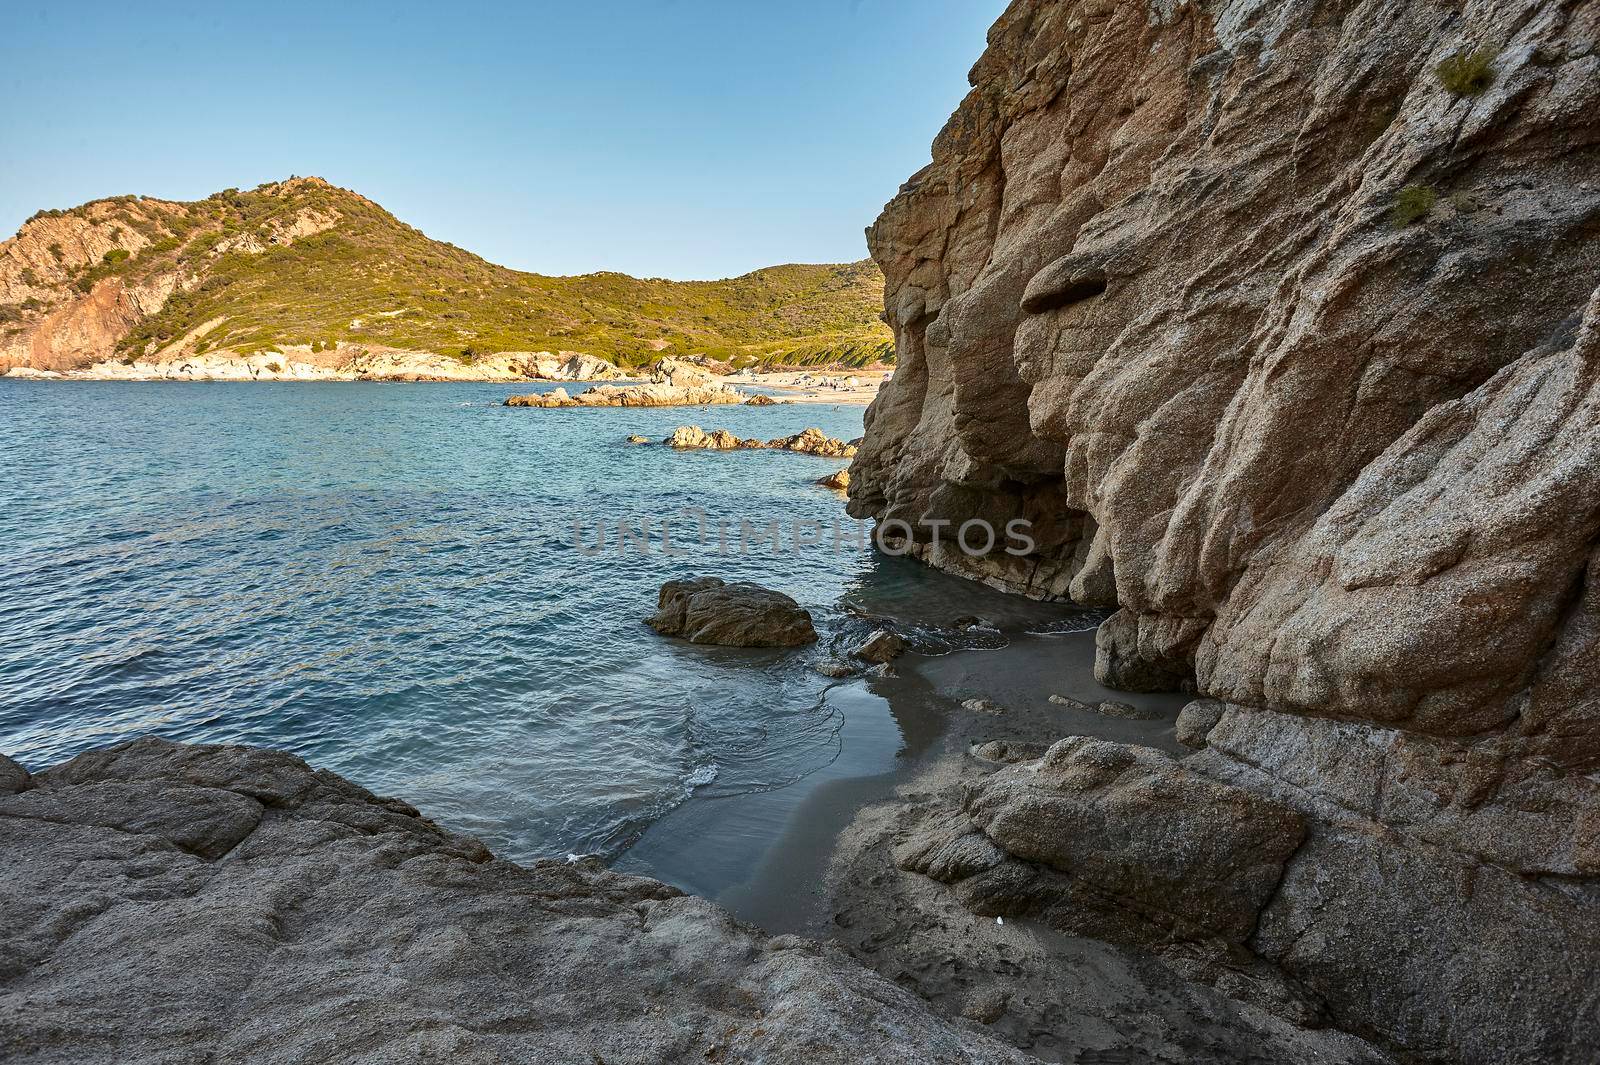 Exit of a natural cave on the beach of Cala Sa Figu in the south of Sardinia near Cagliari during the summer.